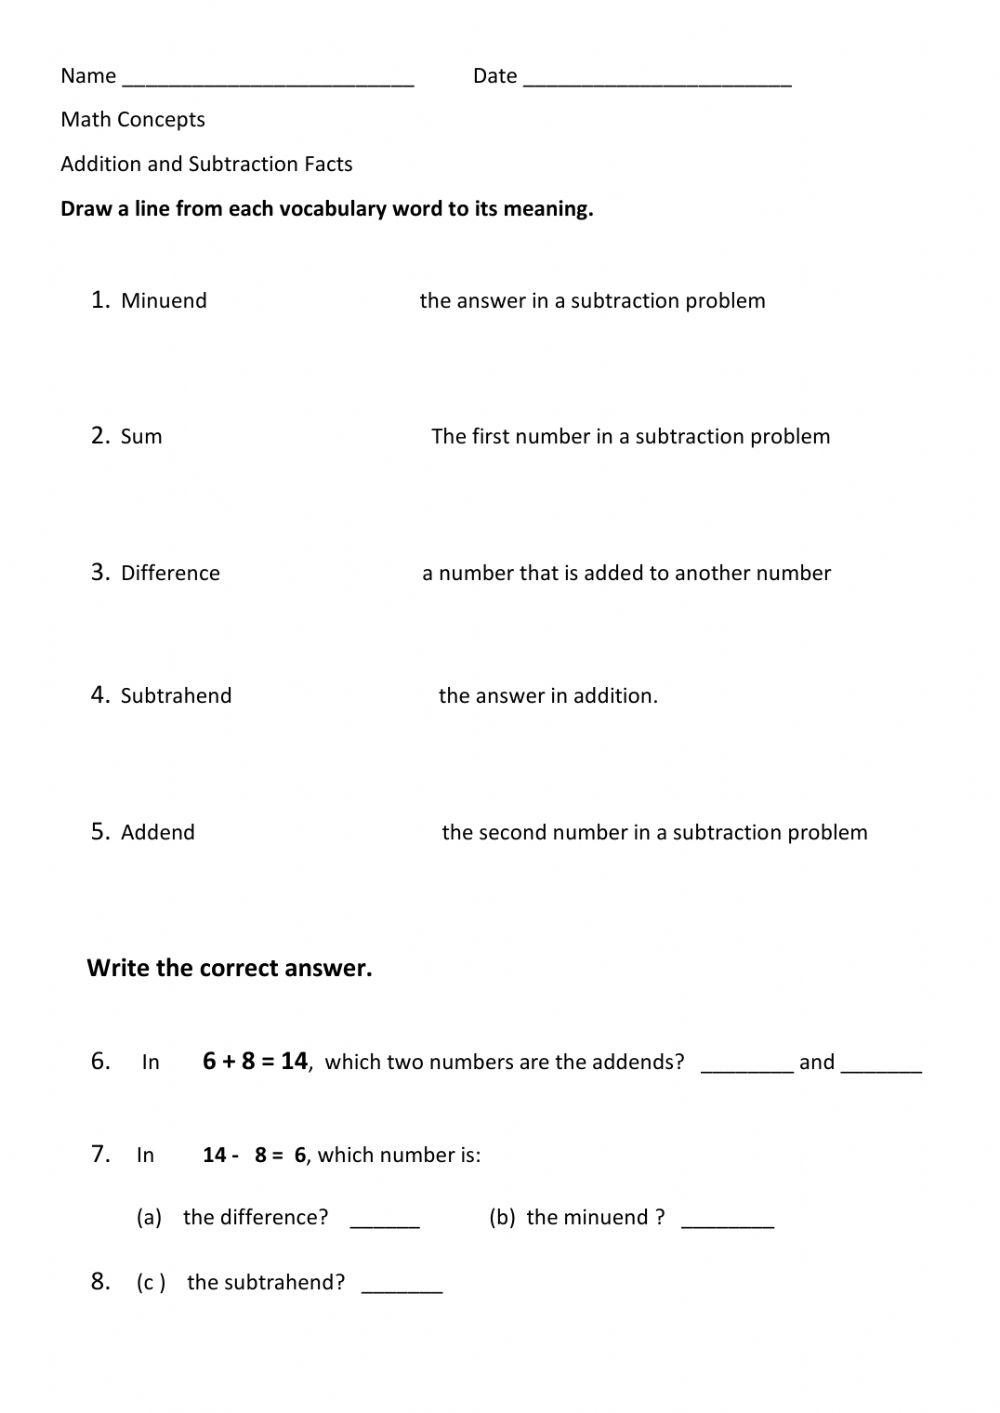 Additition and Subtraction Facts Concepts